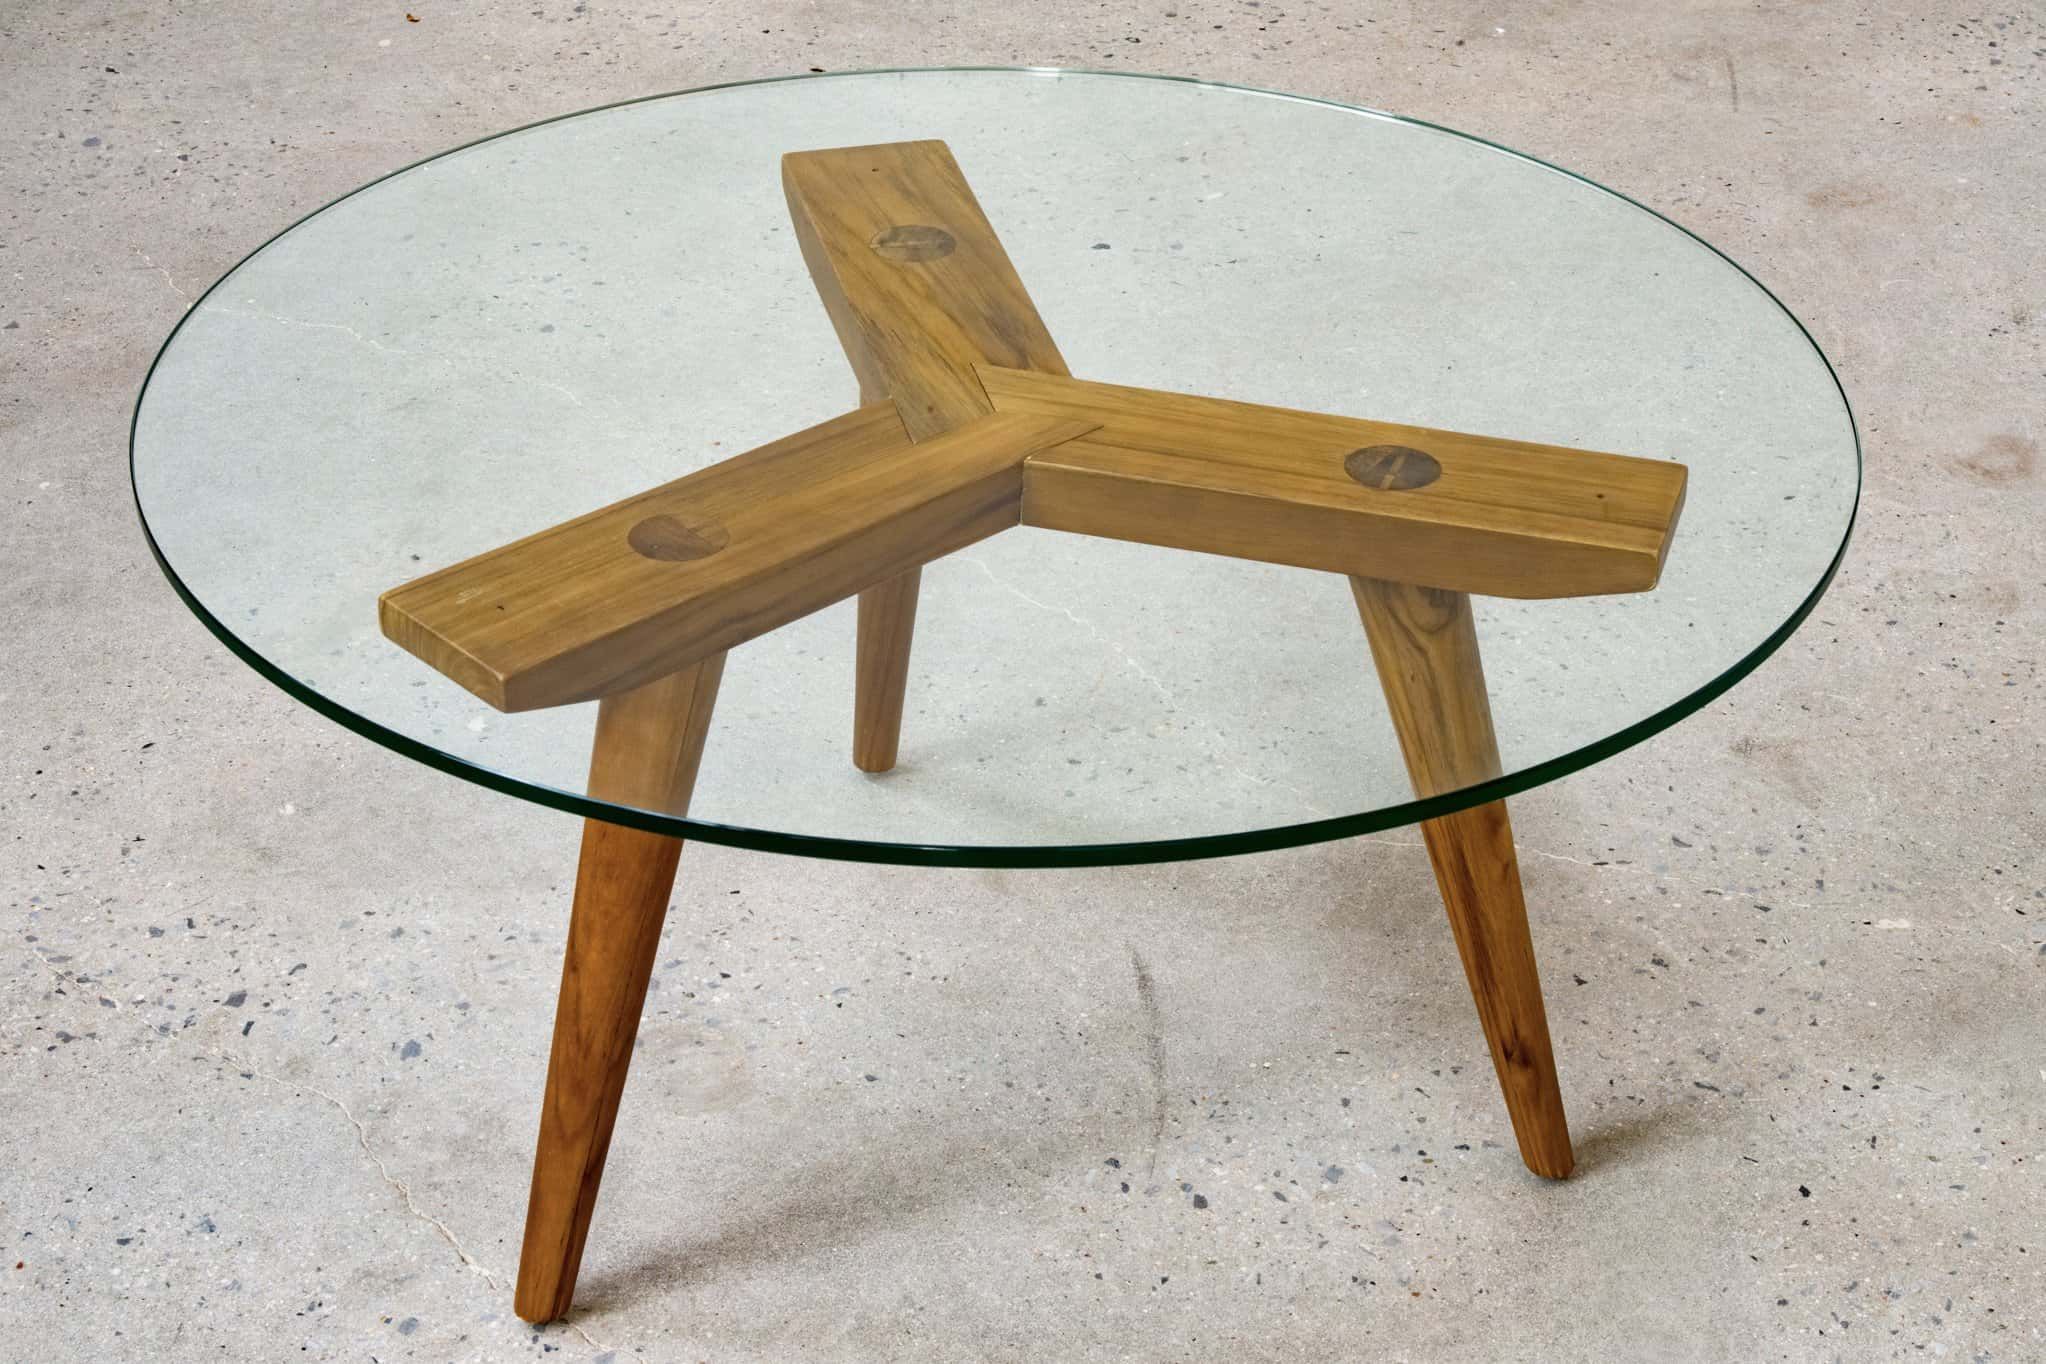 Tripod 36" Coffee Table – Teak Wood/tinted Finish – Glass Pertaining To Coffee Tables With Tripod Legs (View 10 of 15)